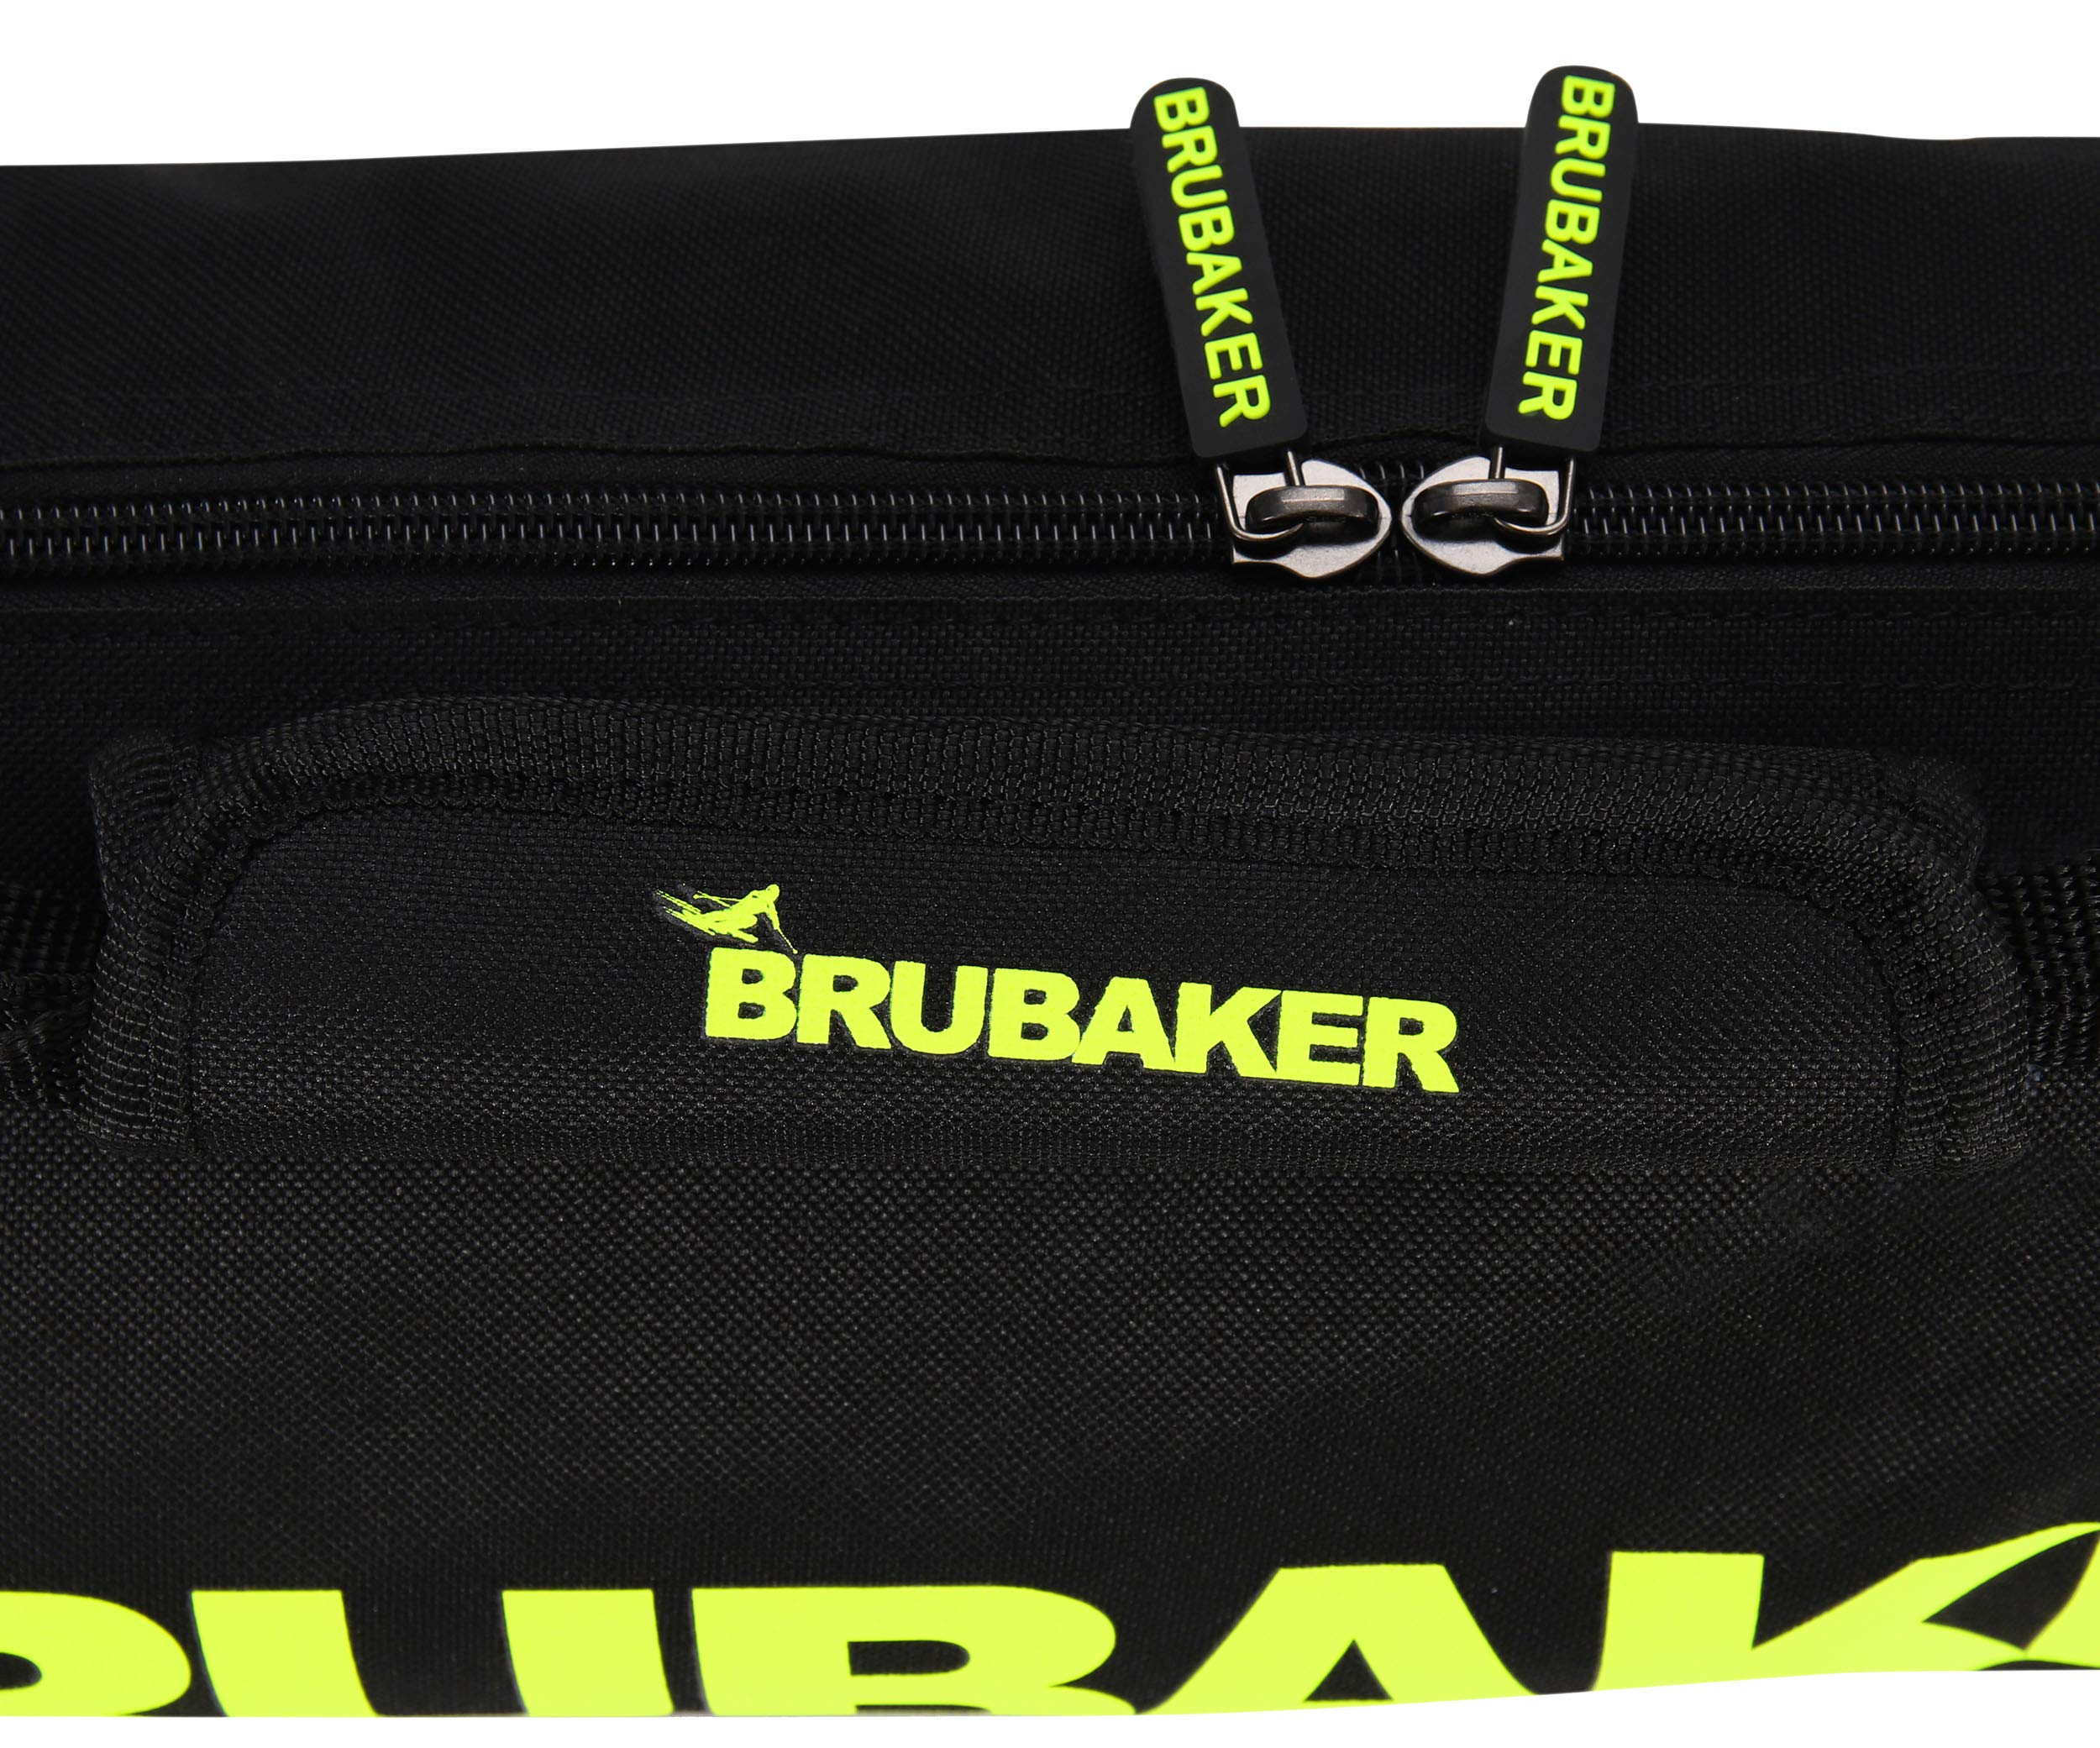 BRUBAKER XC Touring Cross-Country Ski Bag for 1 Pair of Skis and 1 Pair of Poles - Black/Neon Yellow - 76 7/8 Inches / 195 Cm